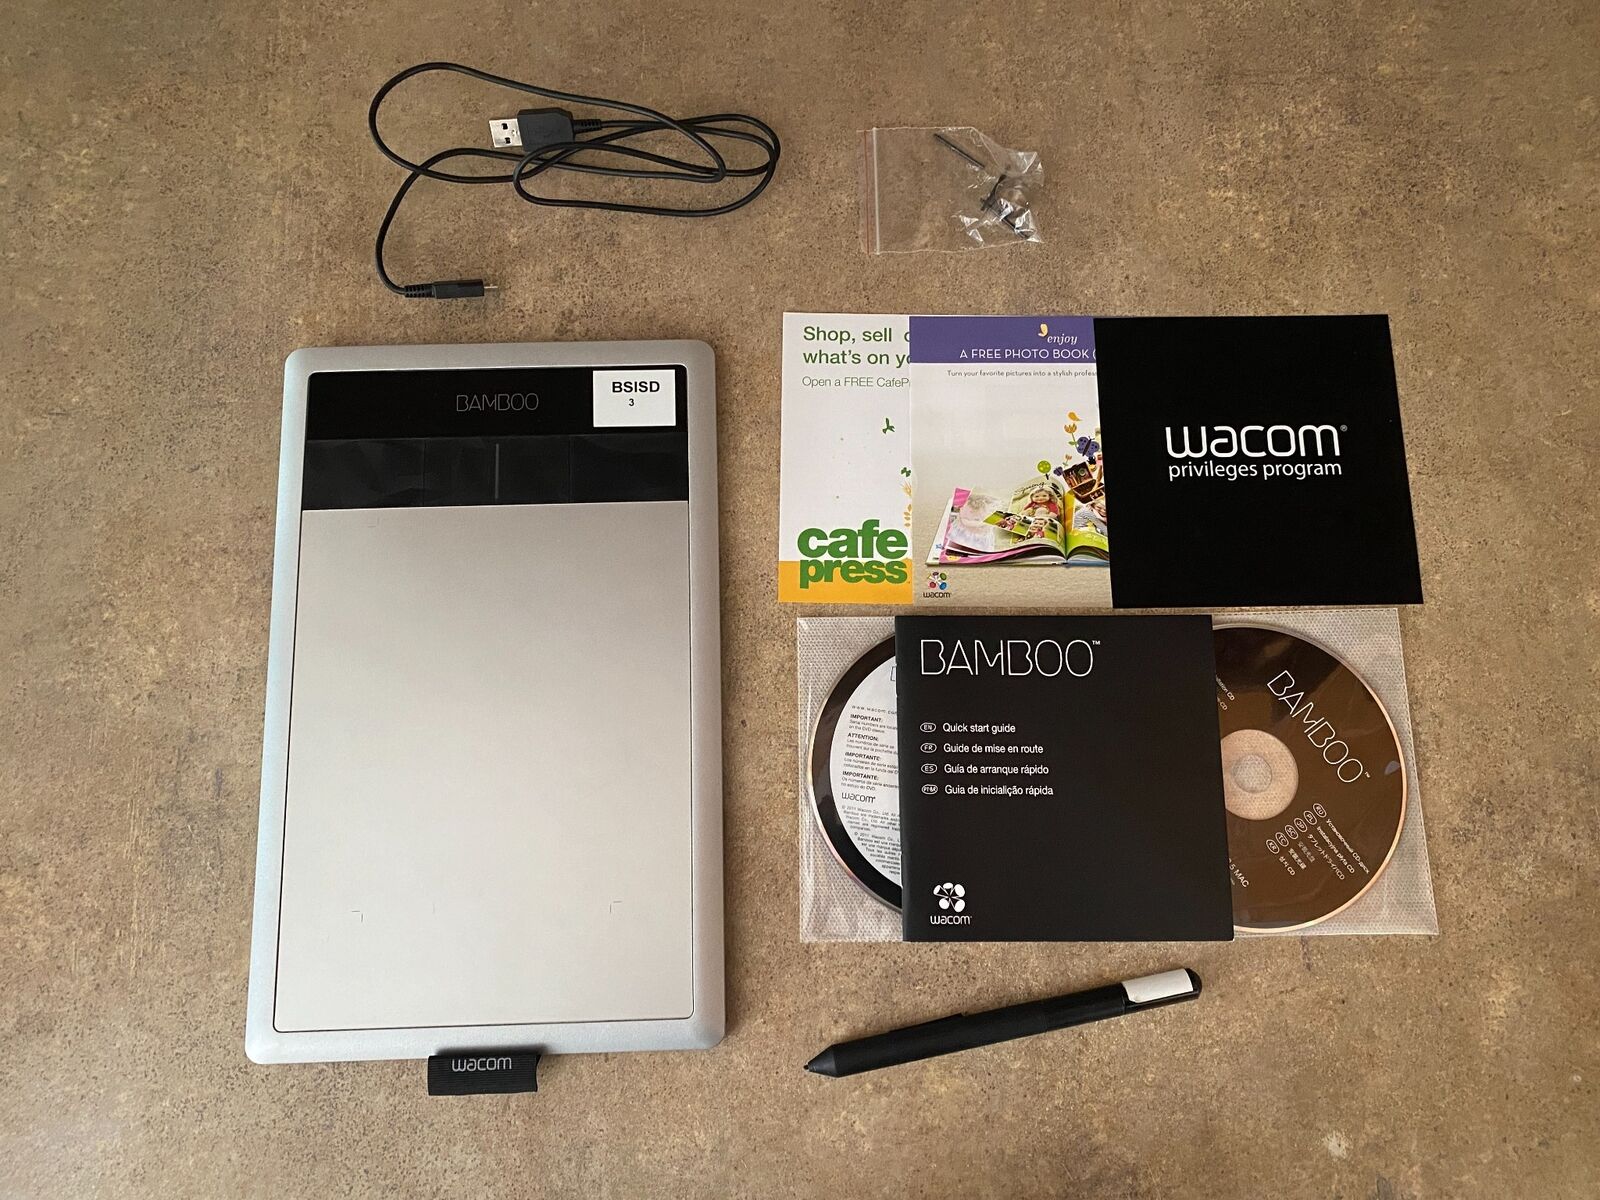 WACOM CTH470 BAMBOO CAPTURE PEN AND TOUCH TABLET W/ ACCESSORIES URUT-37